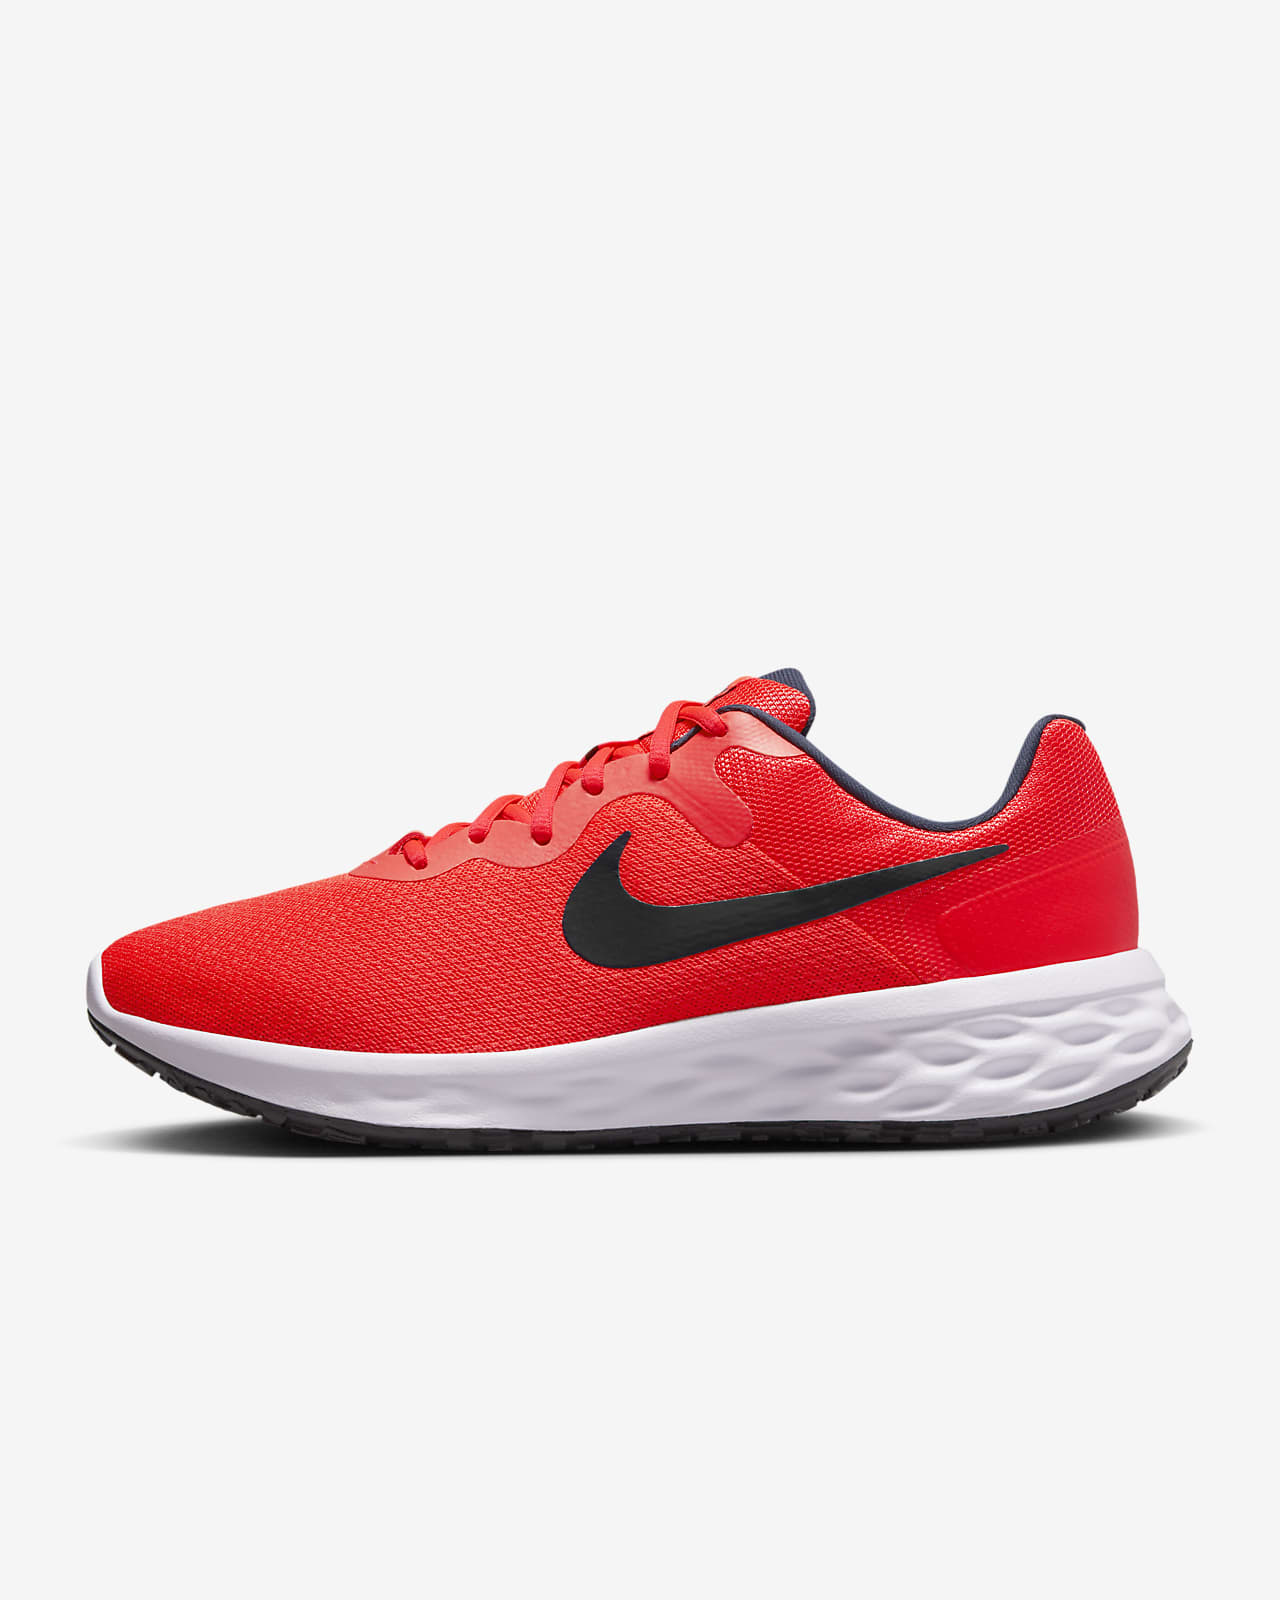 Chaussures de running Nike Revolution pour Homme (extra Nike